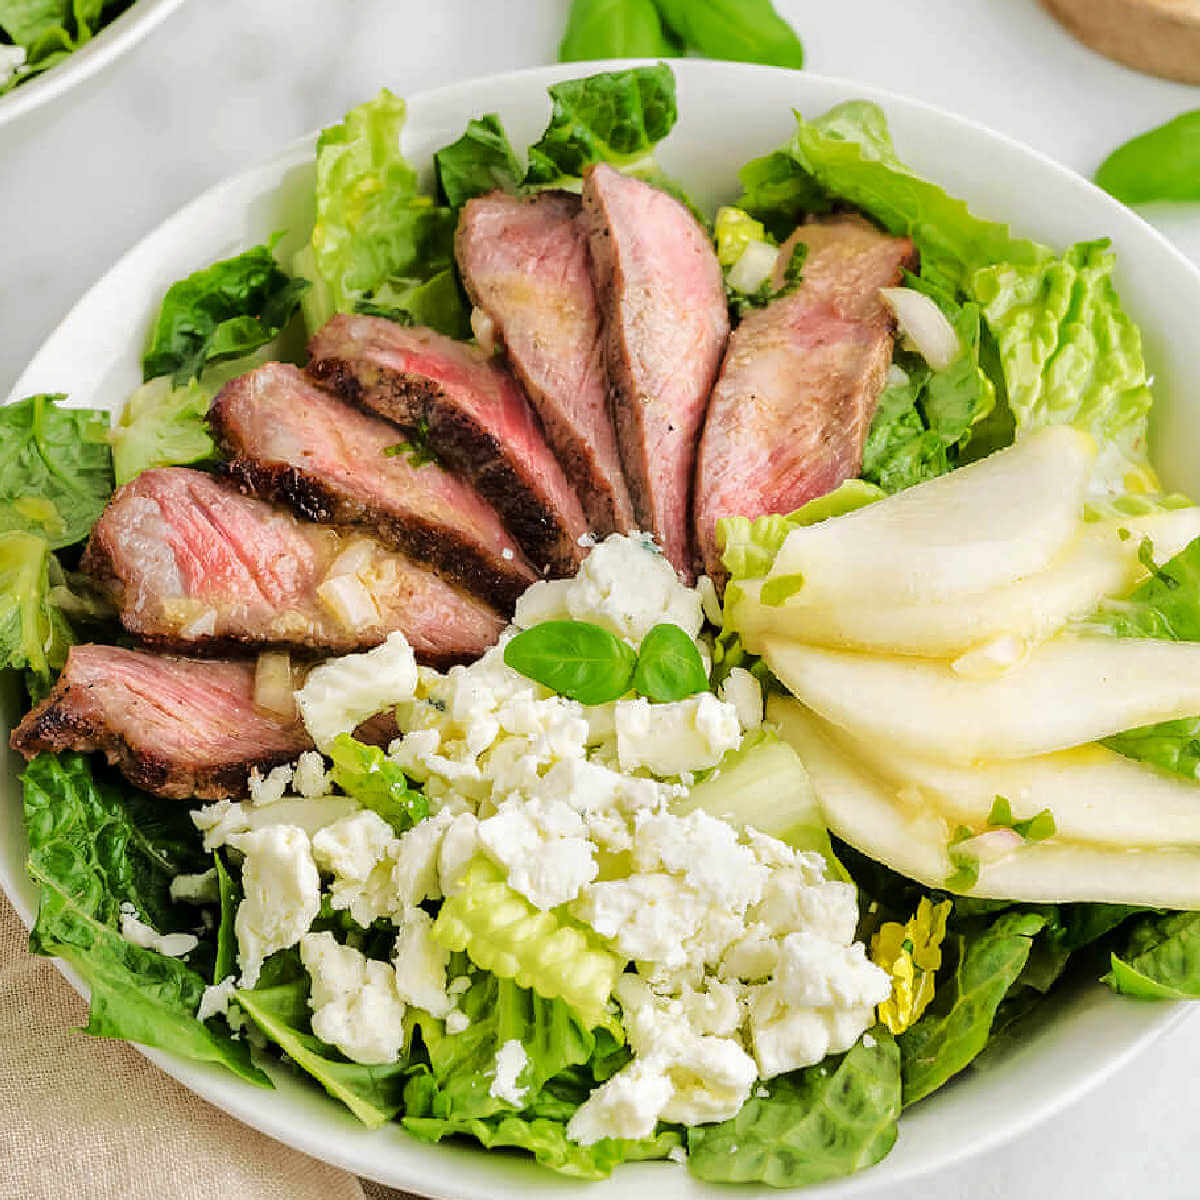 Grilled Steak Salad with French Vinaigrette